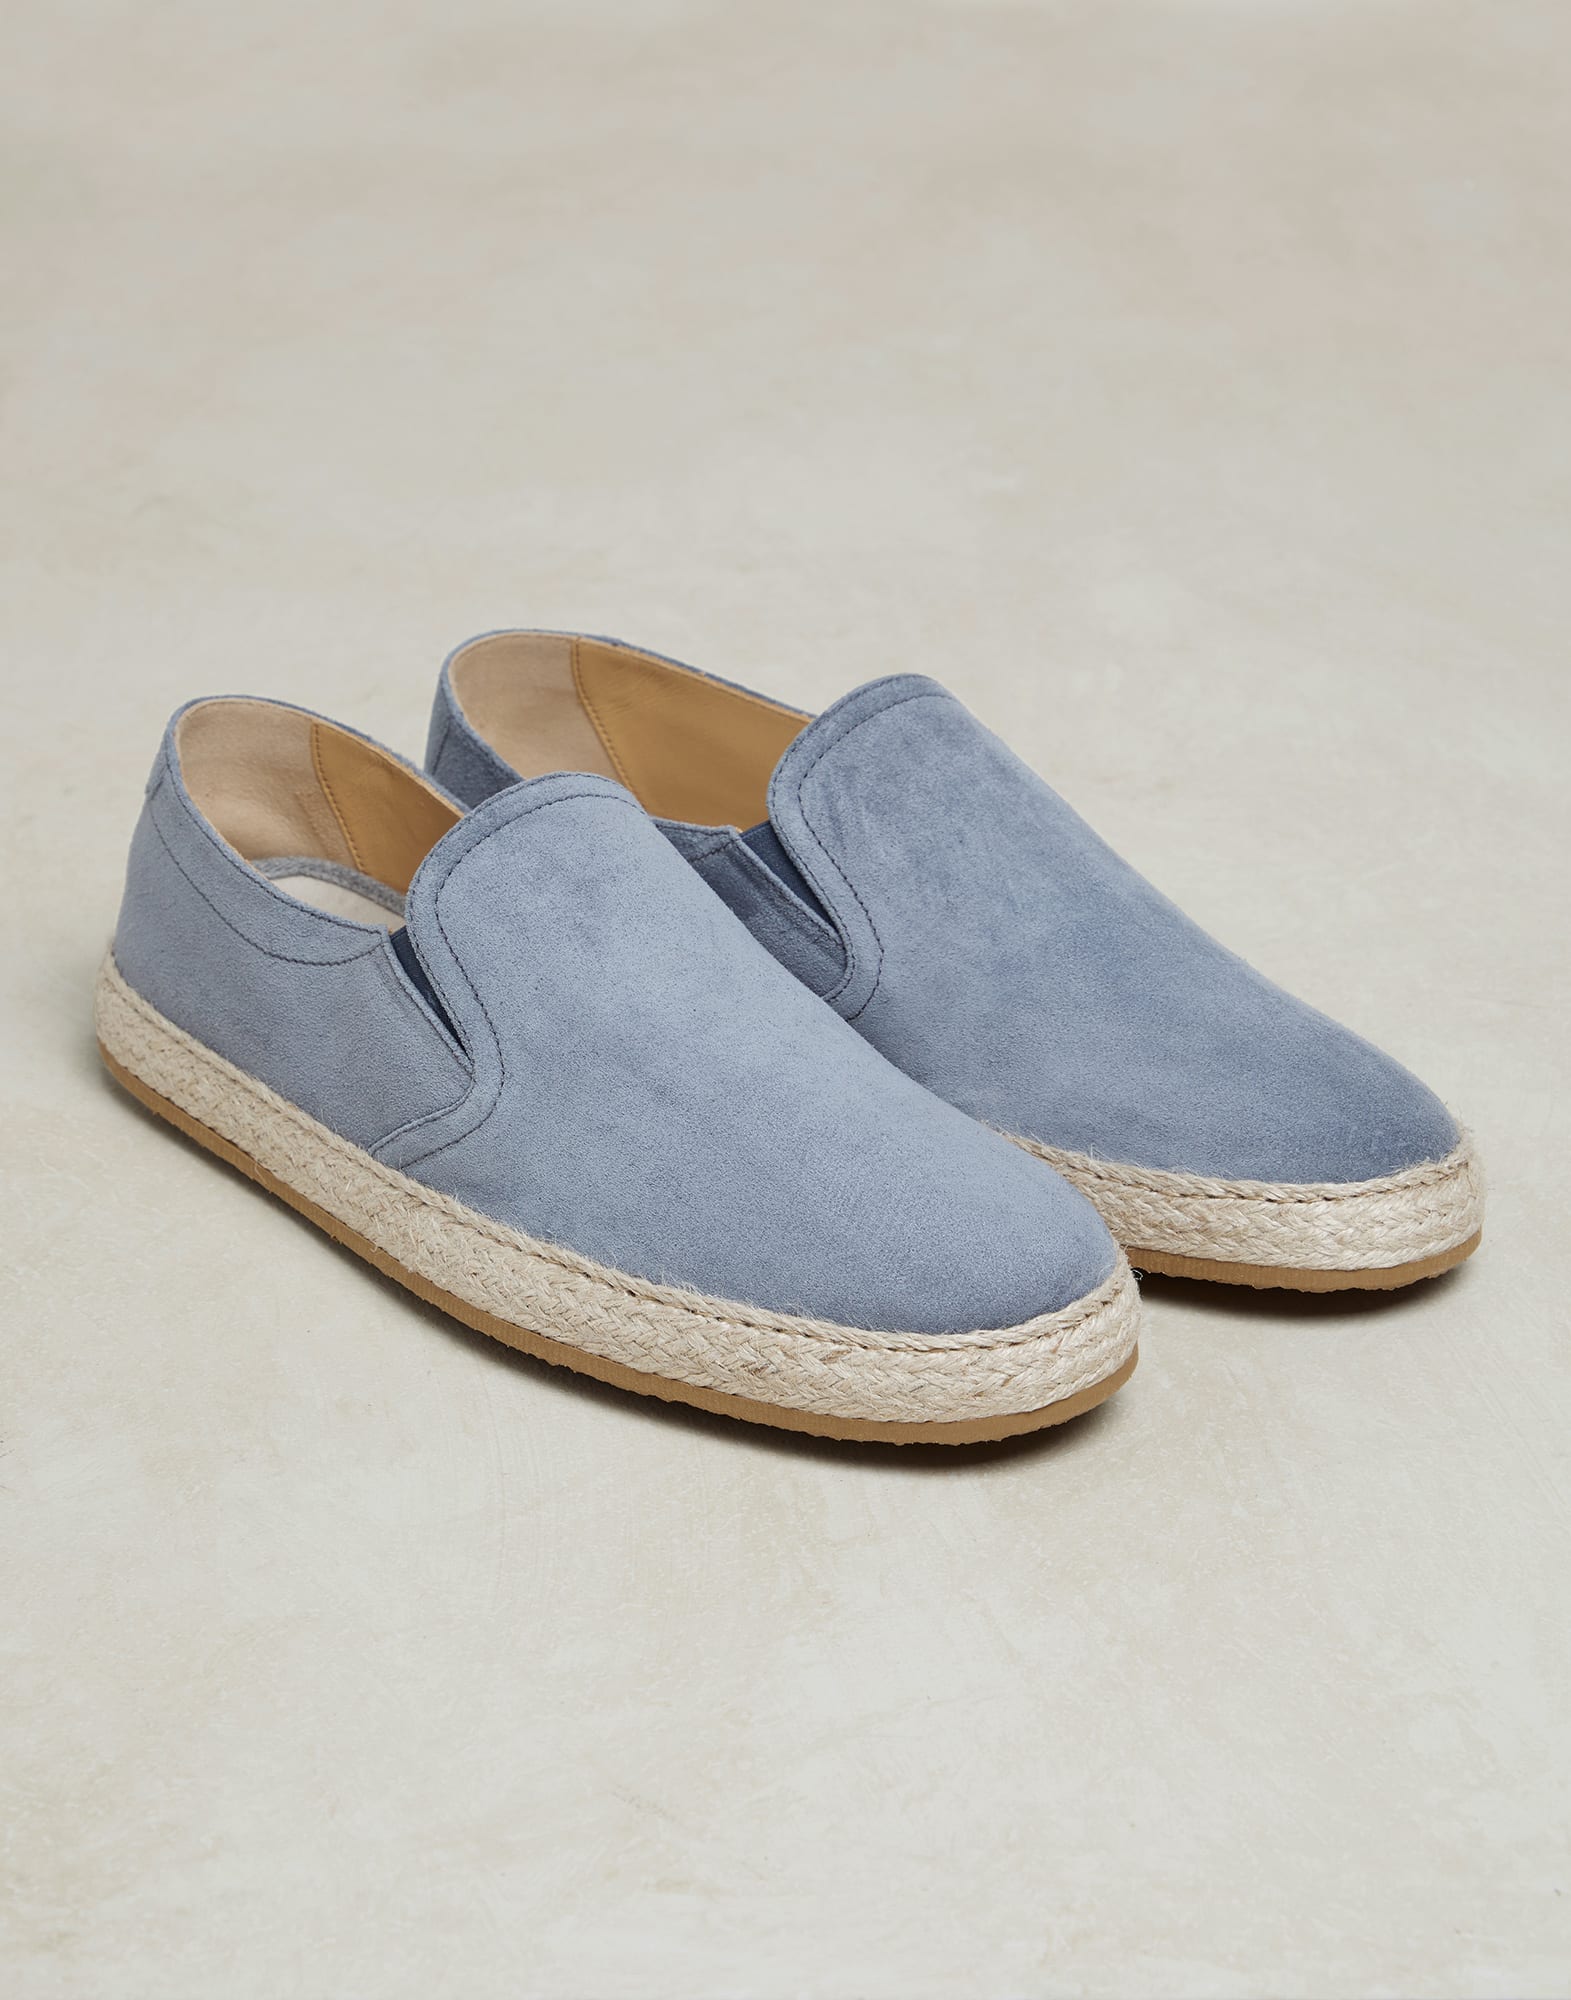 Men's leisure shoes: casual loafers and boat shoes | Brunello Cucinelli